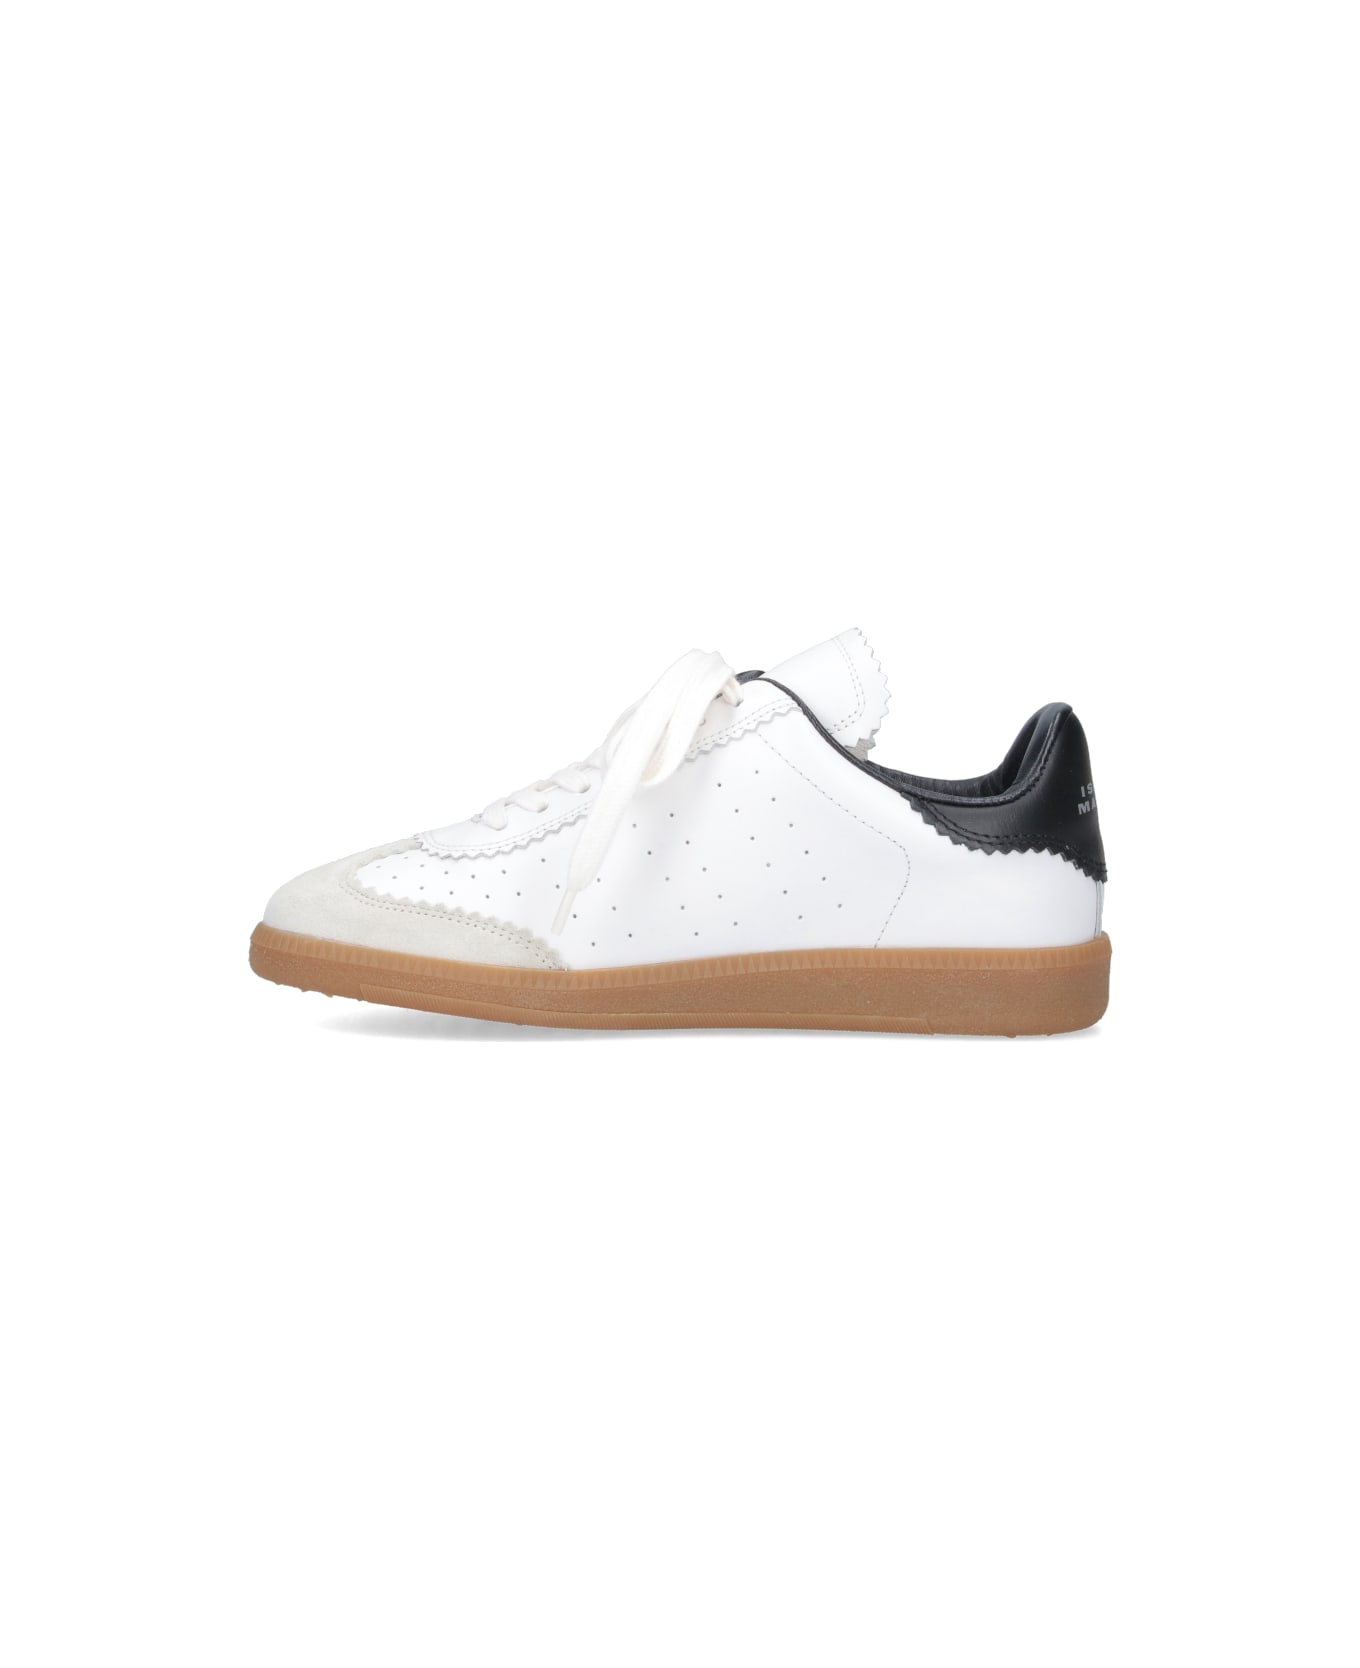 Isabel Marant Bryce Sneakers - Wh White